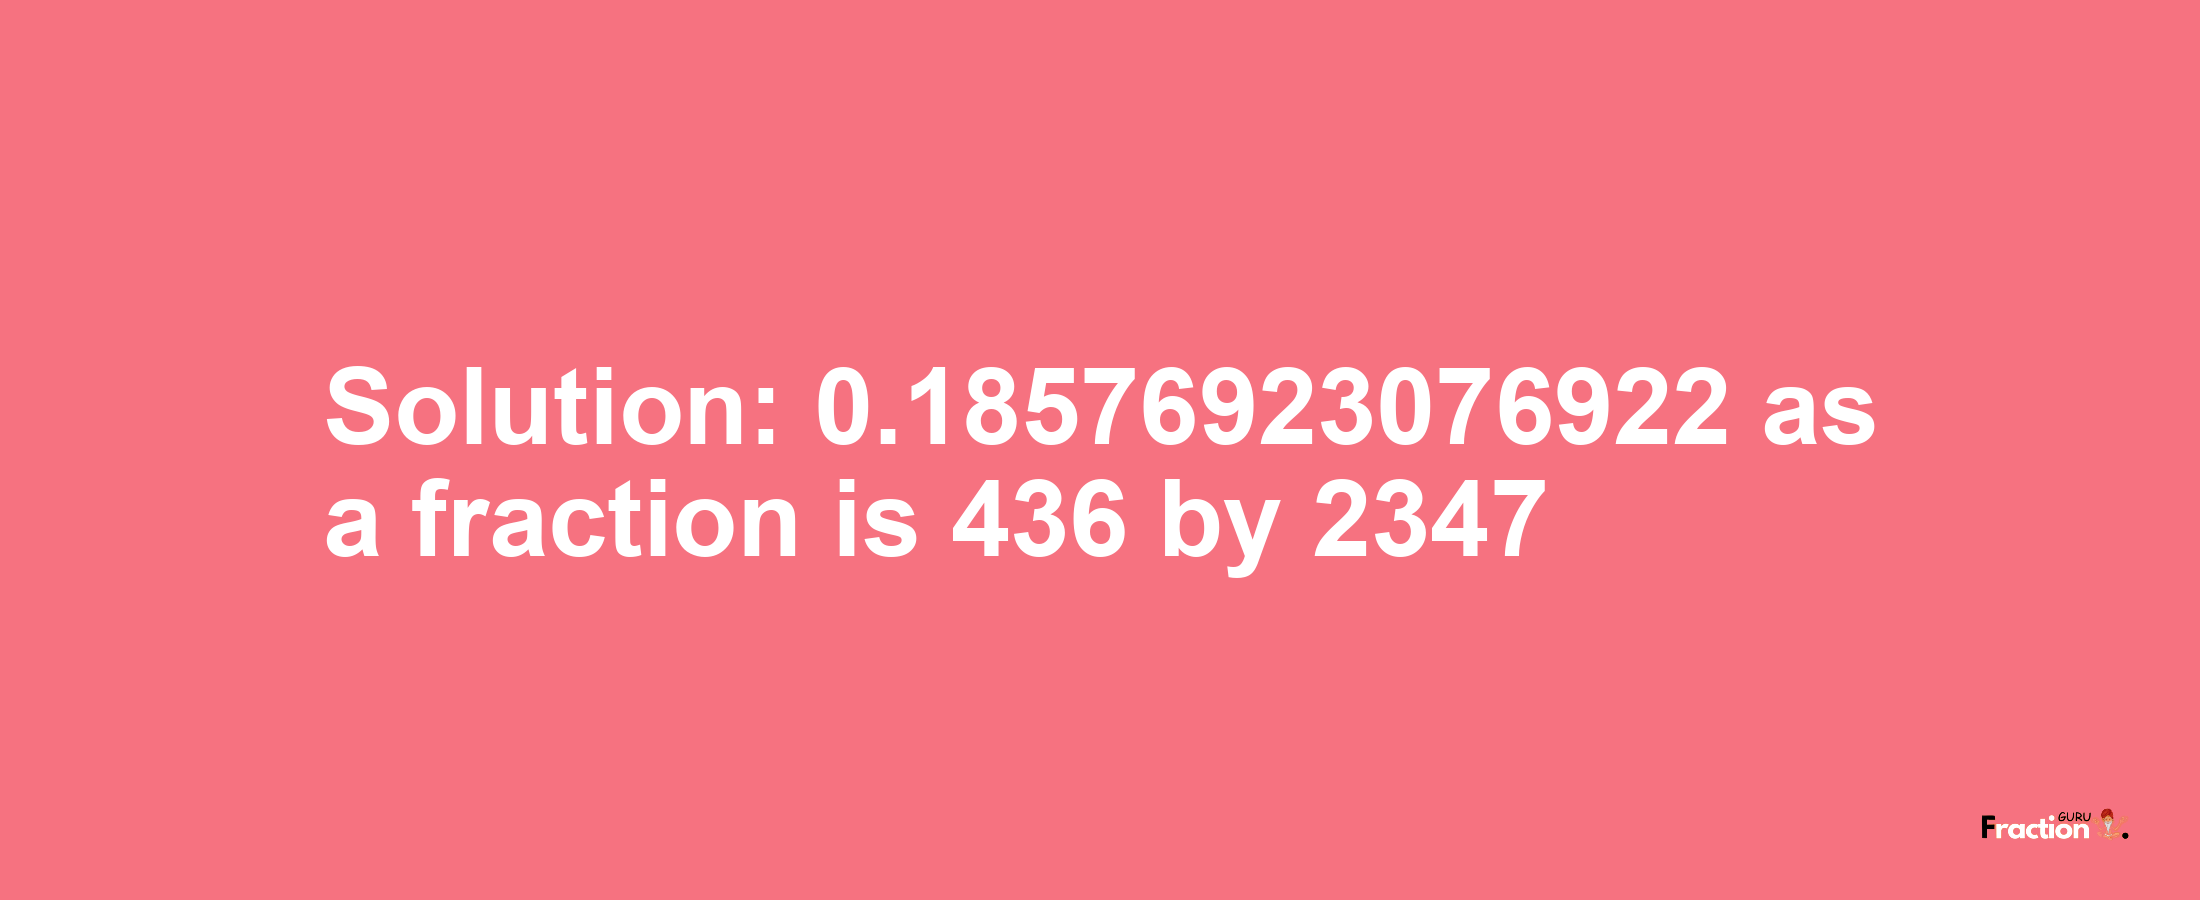 Solution:0.18576923076922 as a fraction is 436/2347